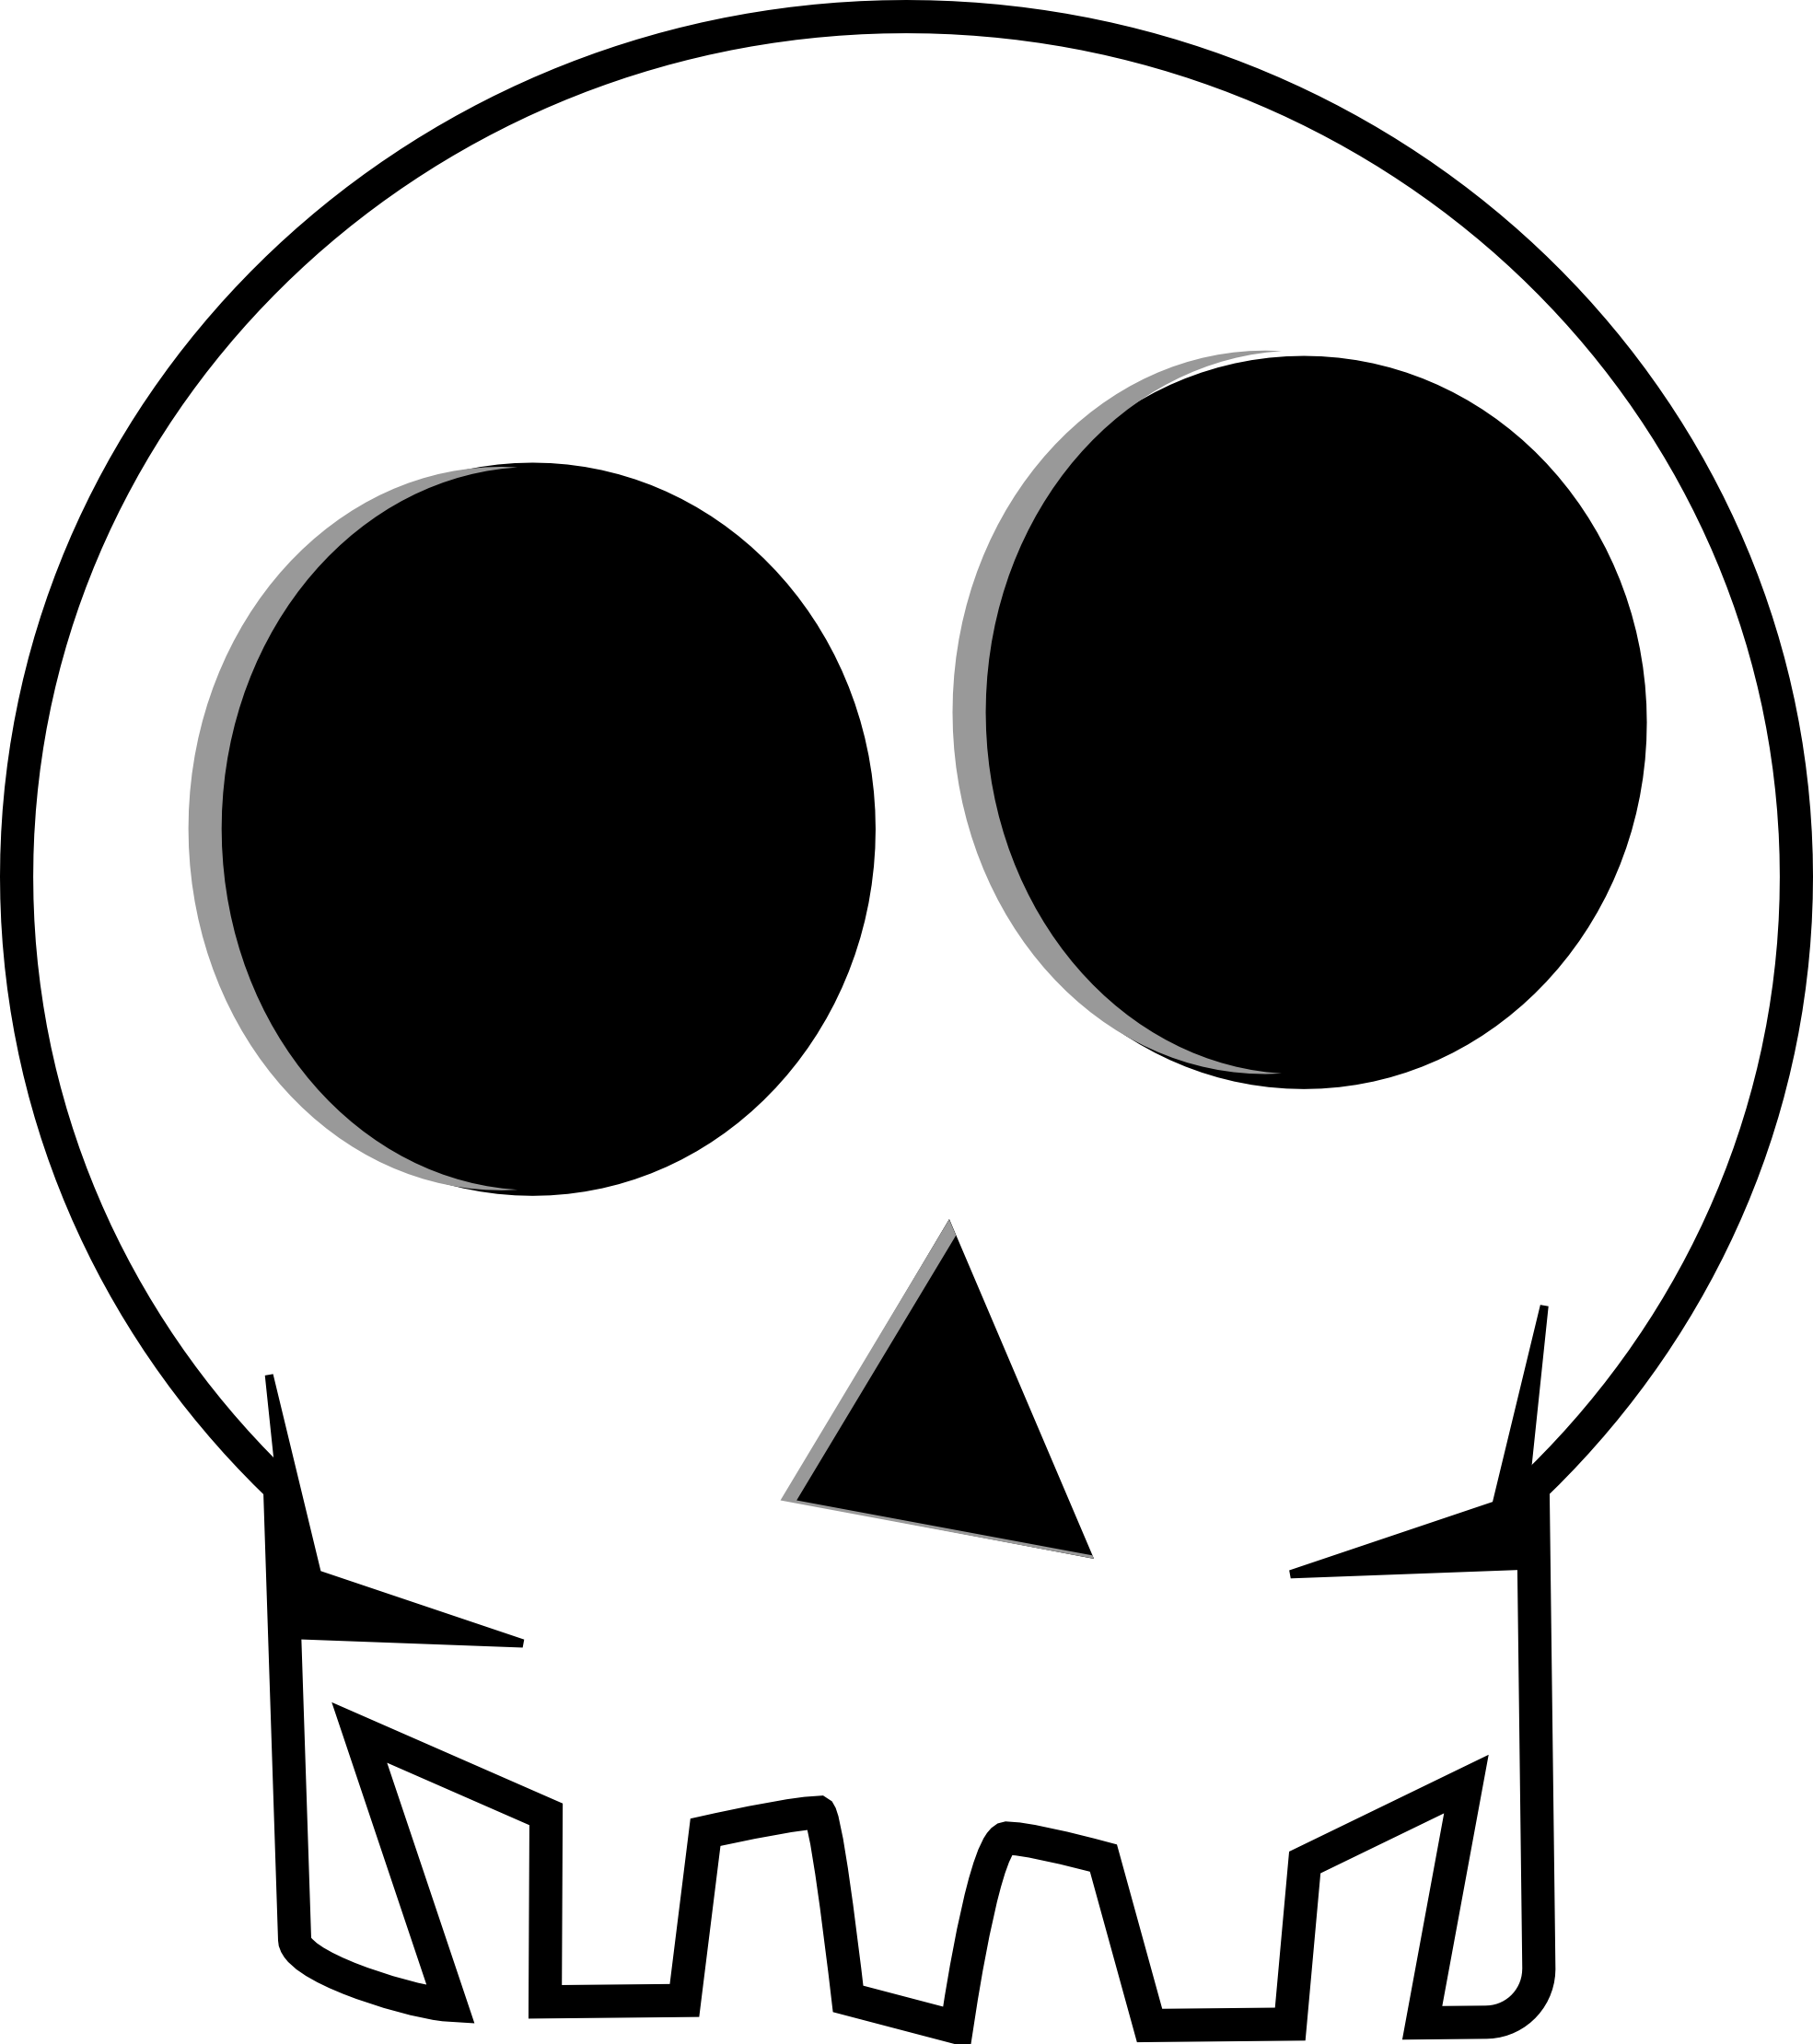 Skull free to use clipart